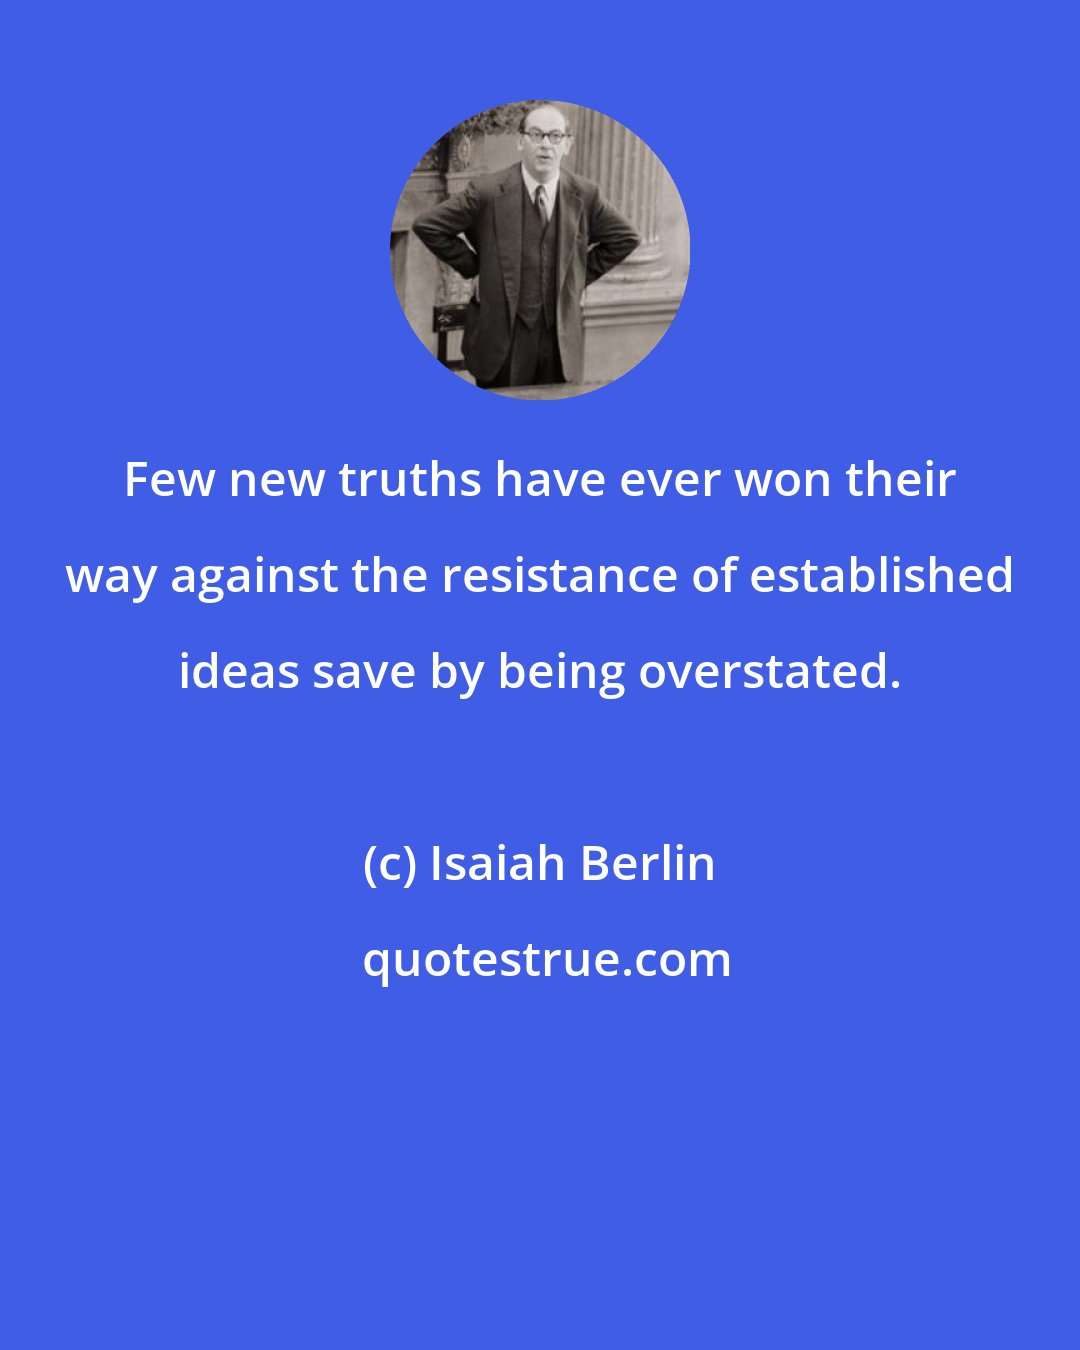 Isaiah Berlin: Few new truths have ever won their way against the resistance of established ideas save by being overstated.